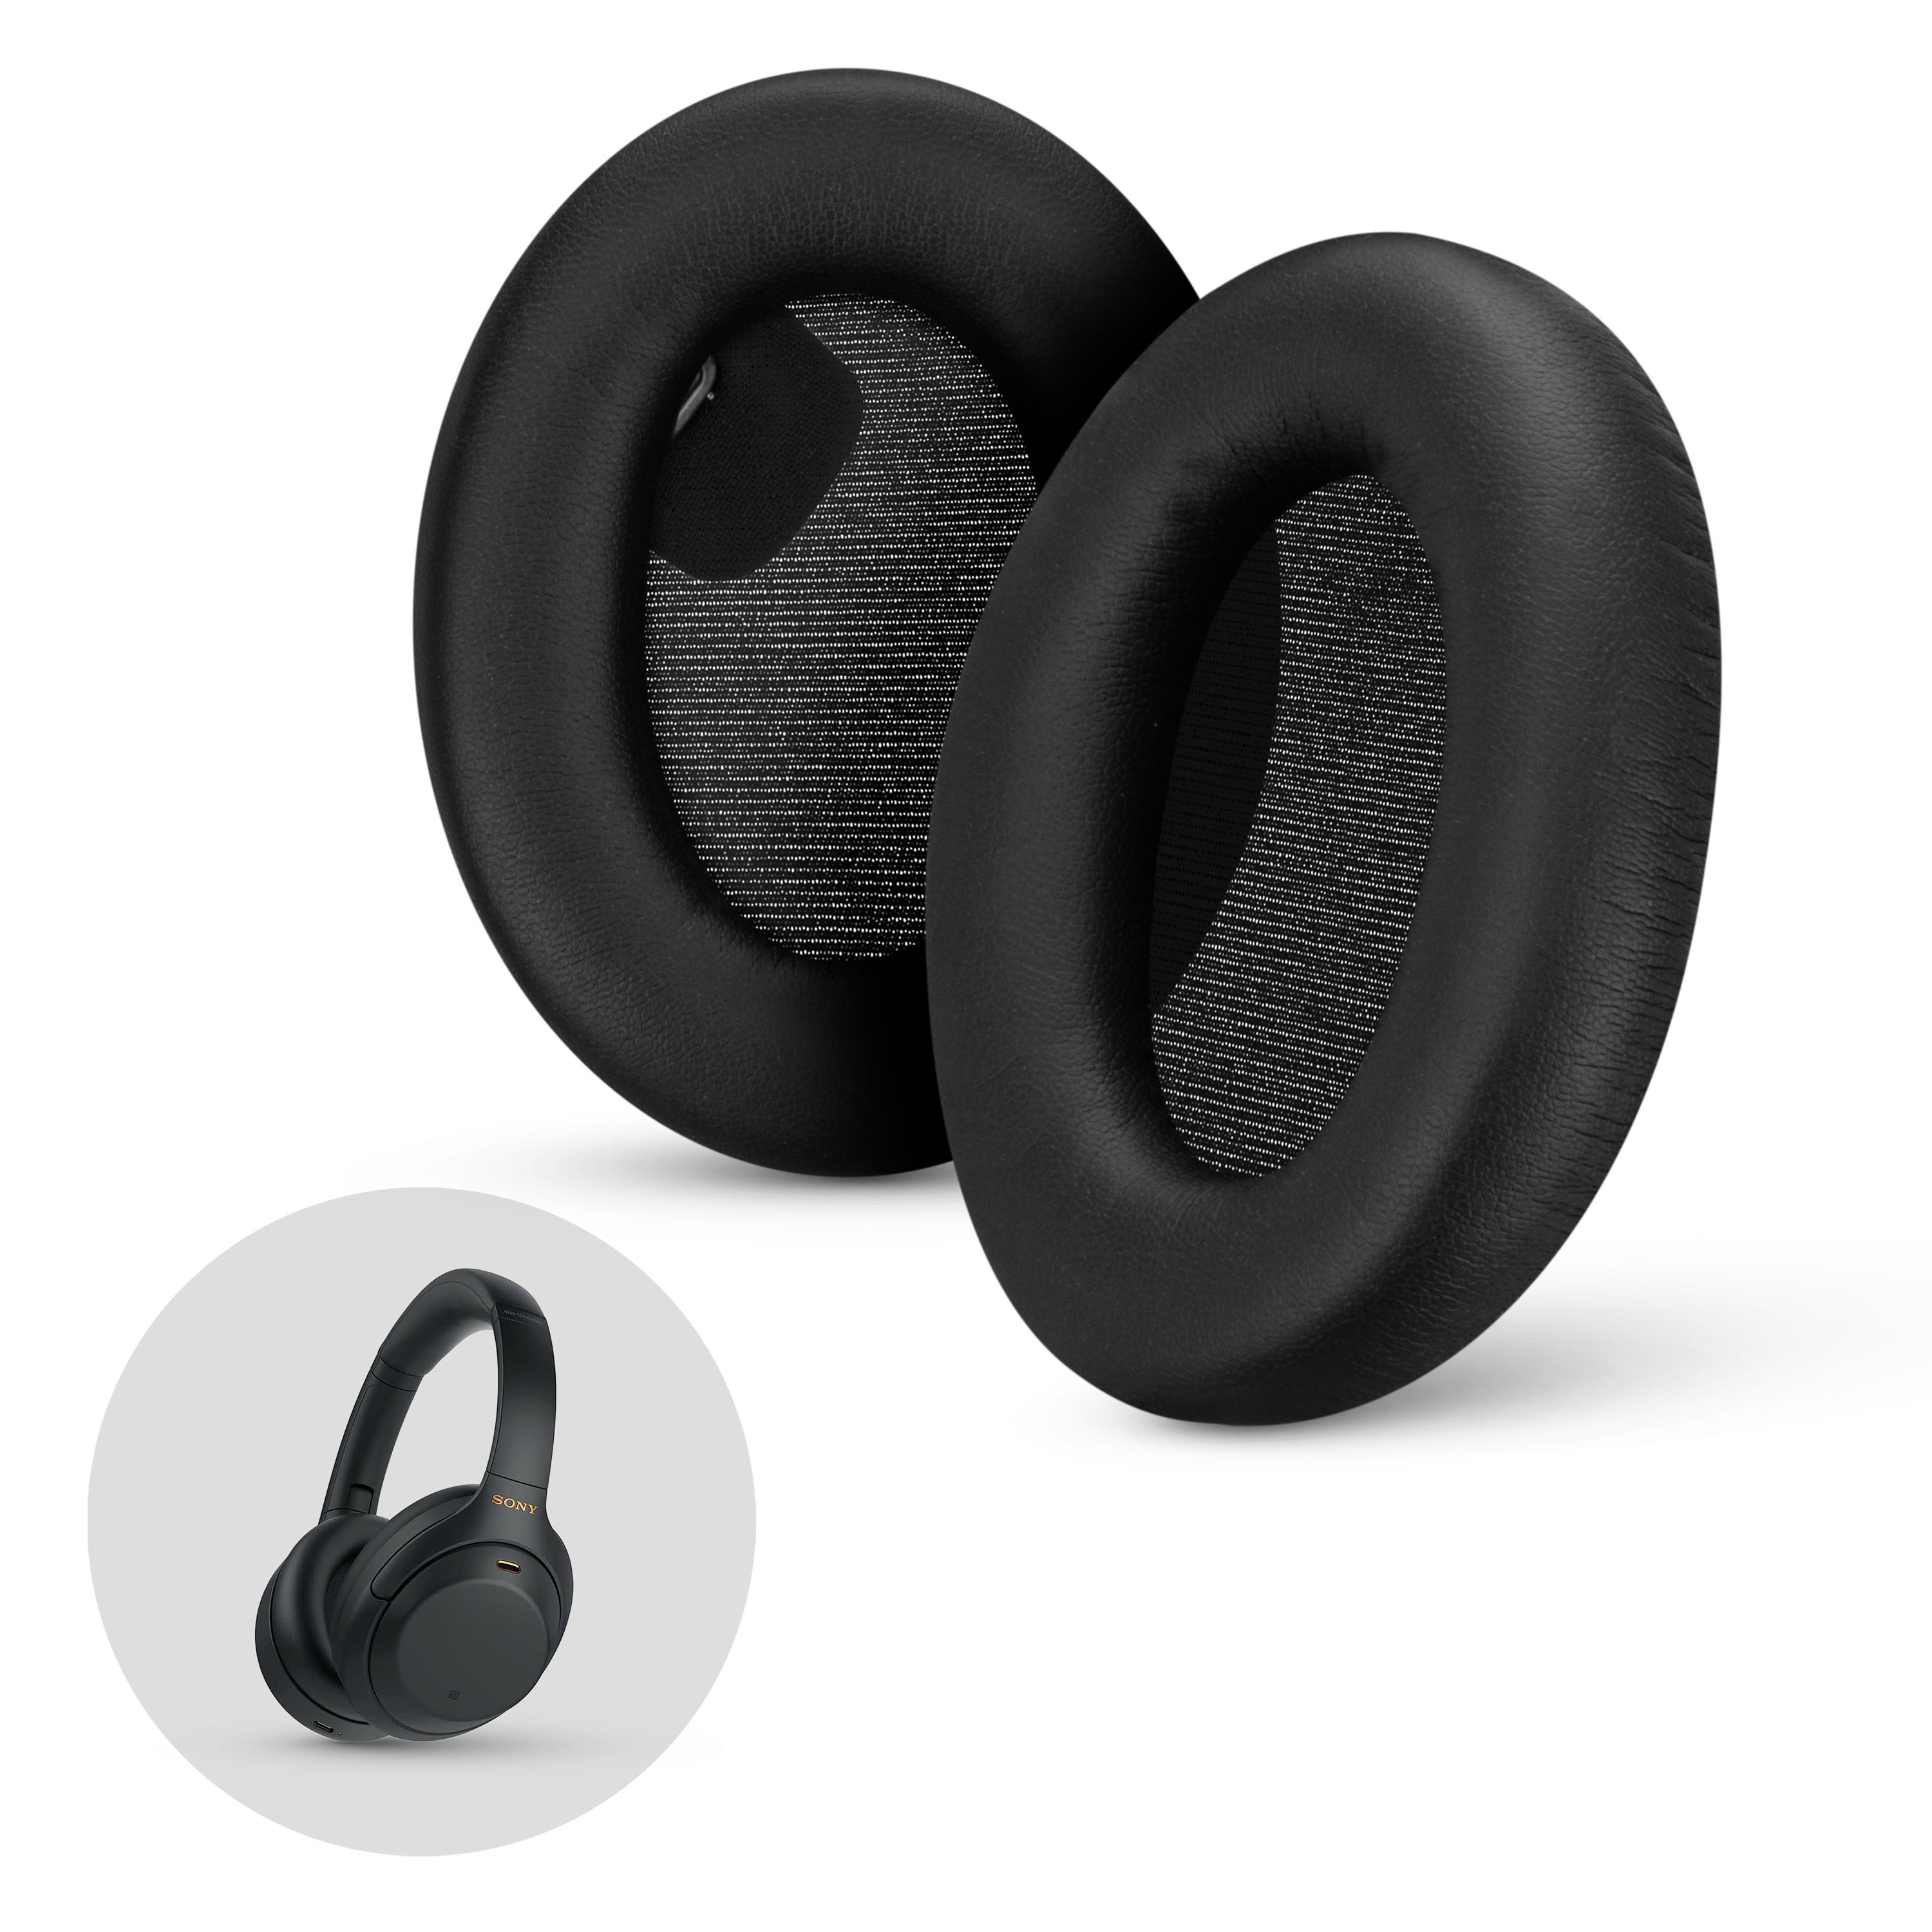 WH-XB910N earpads wearing out. Any way I can fix this? : r/sony